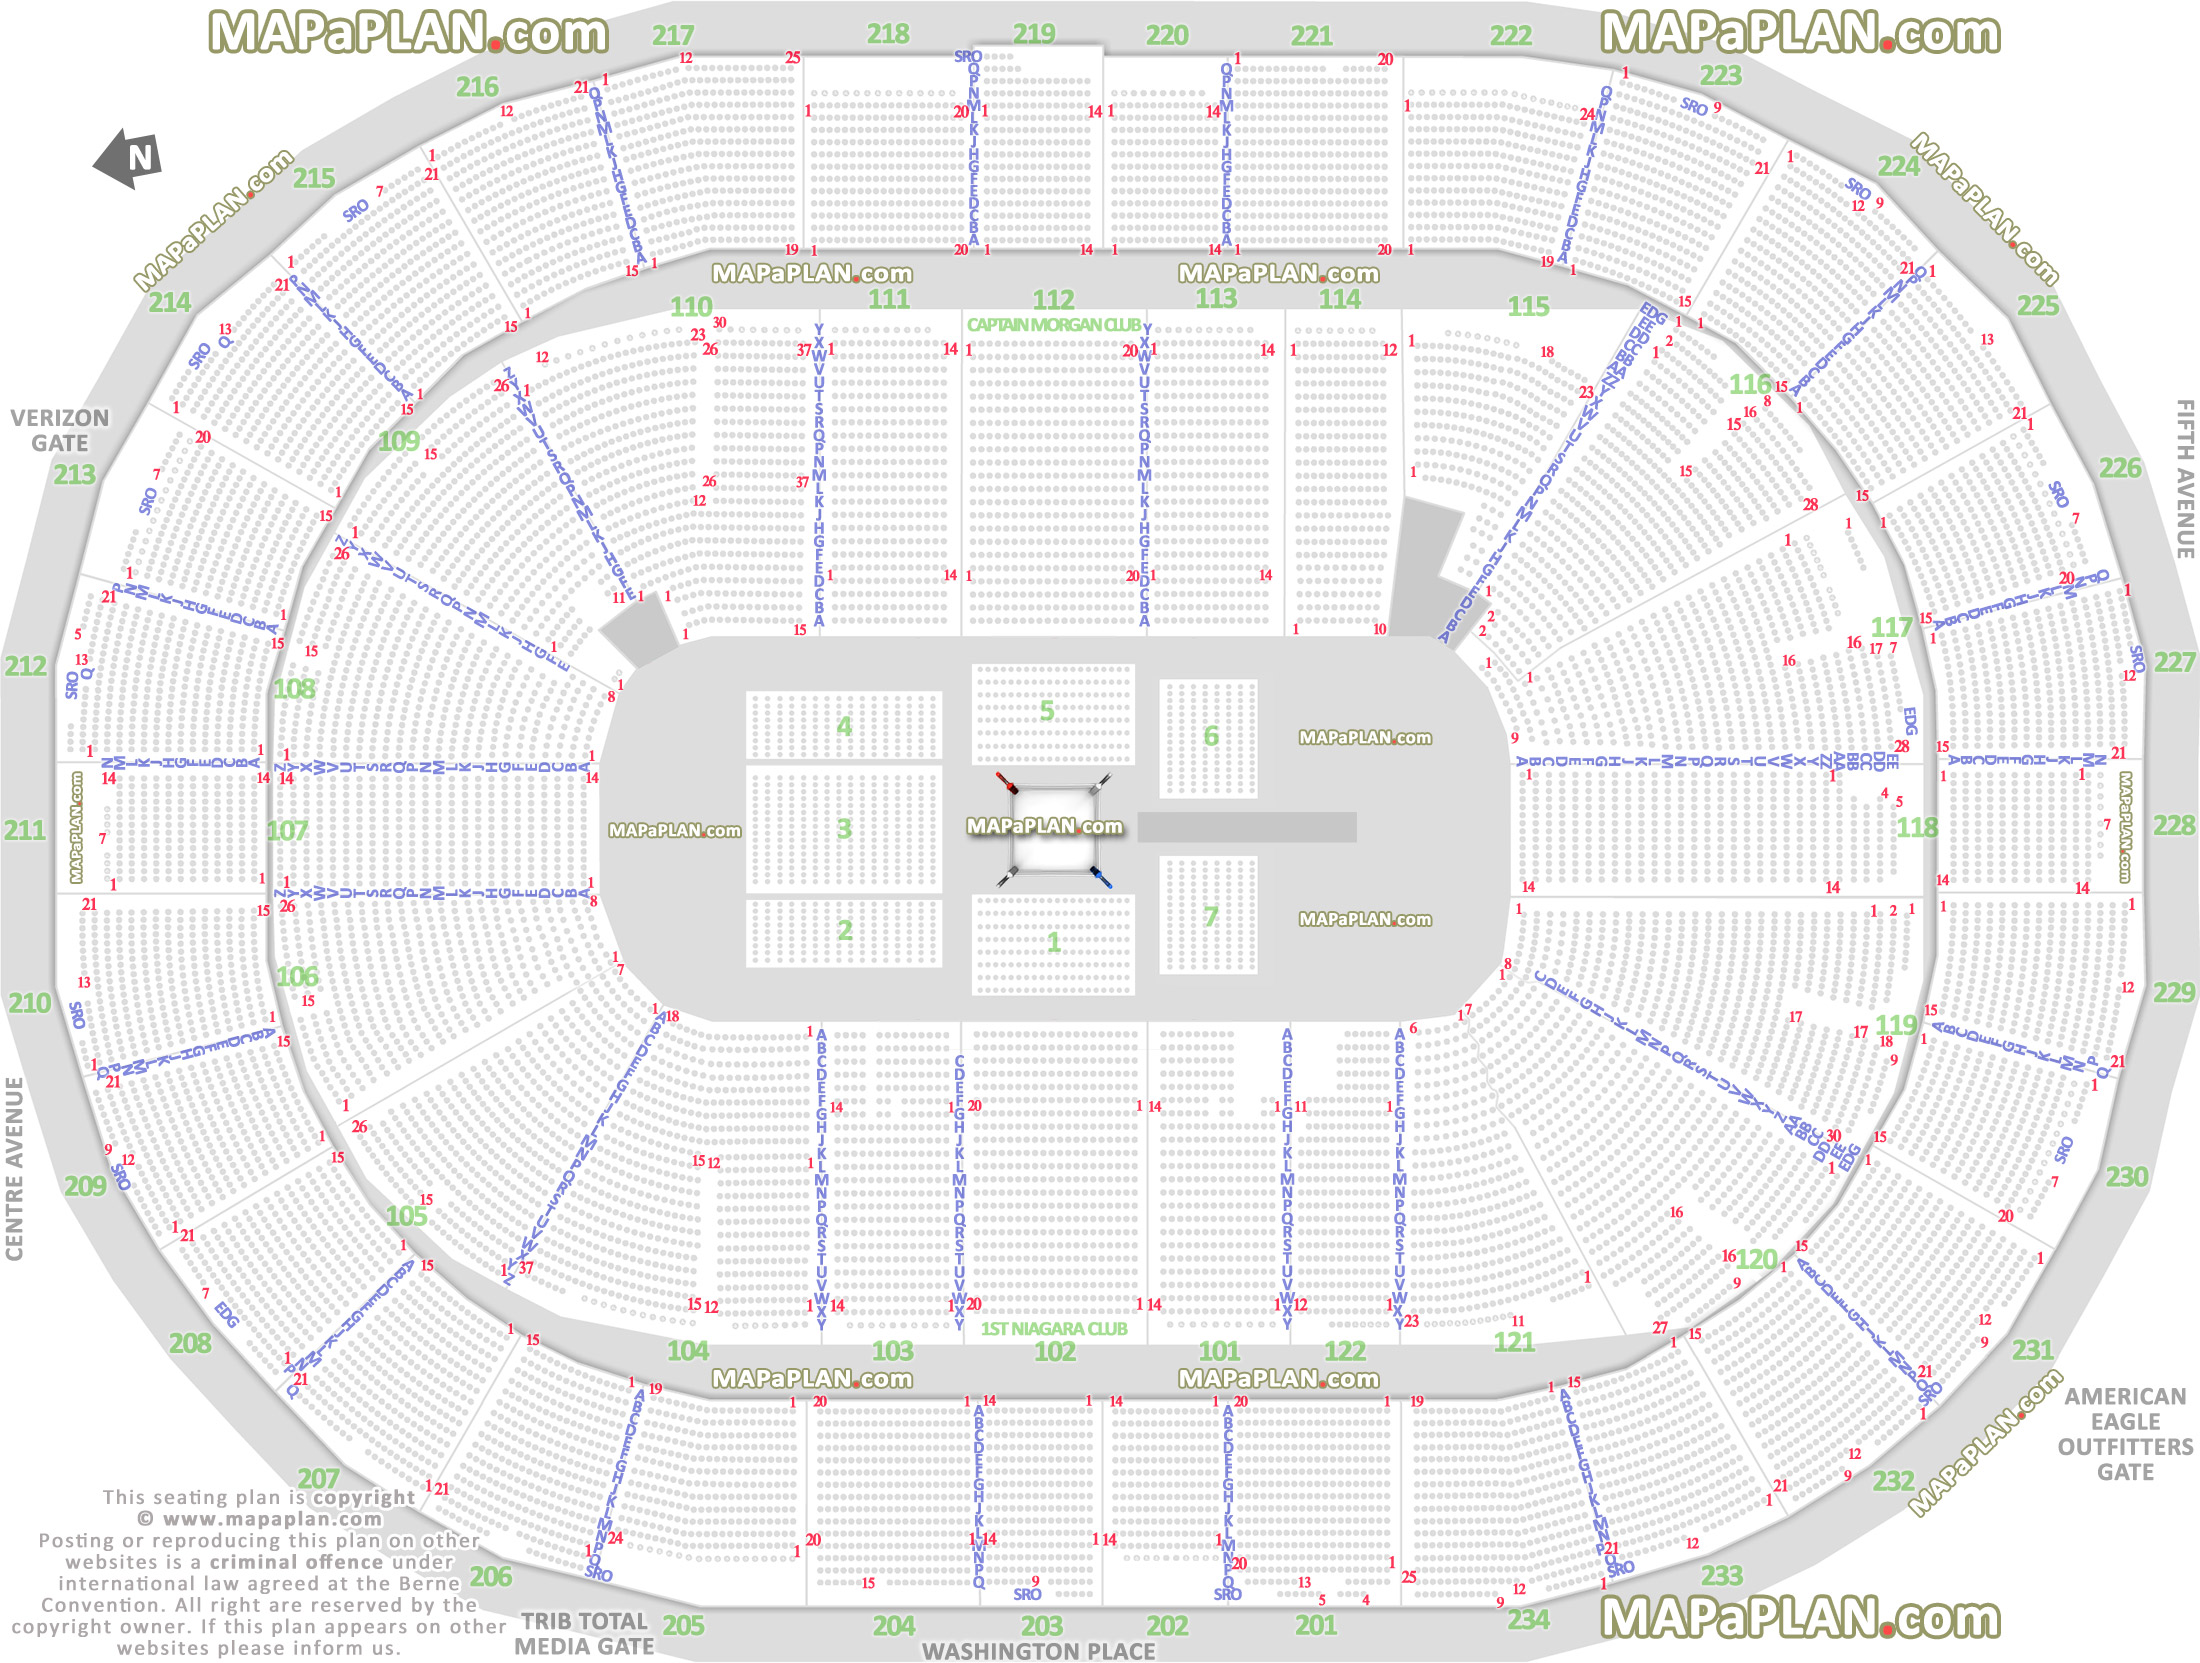 Consol Energy Pittsburgh Seating Chart